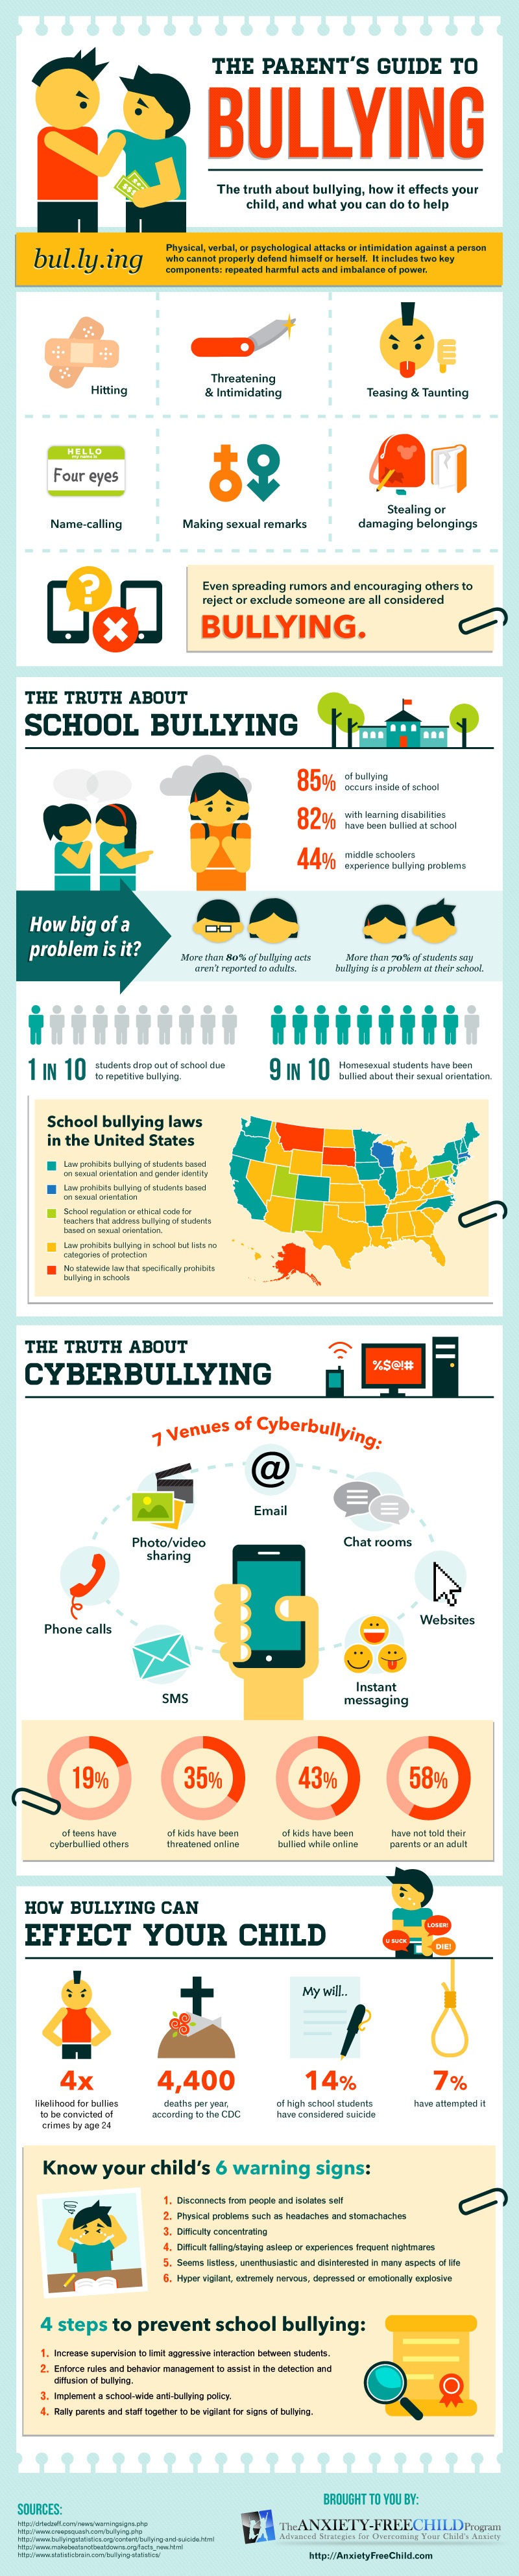 https://elearninginfographics.com/wp-content/uploads/The-Parent%E2%80%99s-Guide-to-Bullying-Infographic.jpg